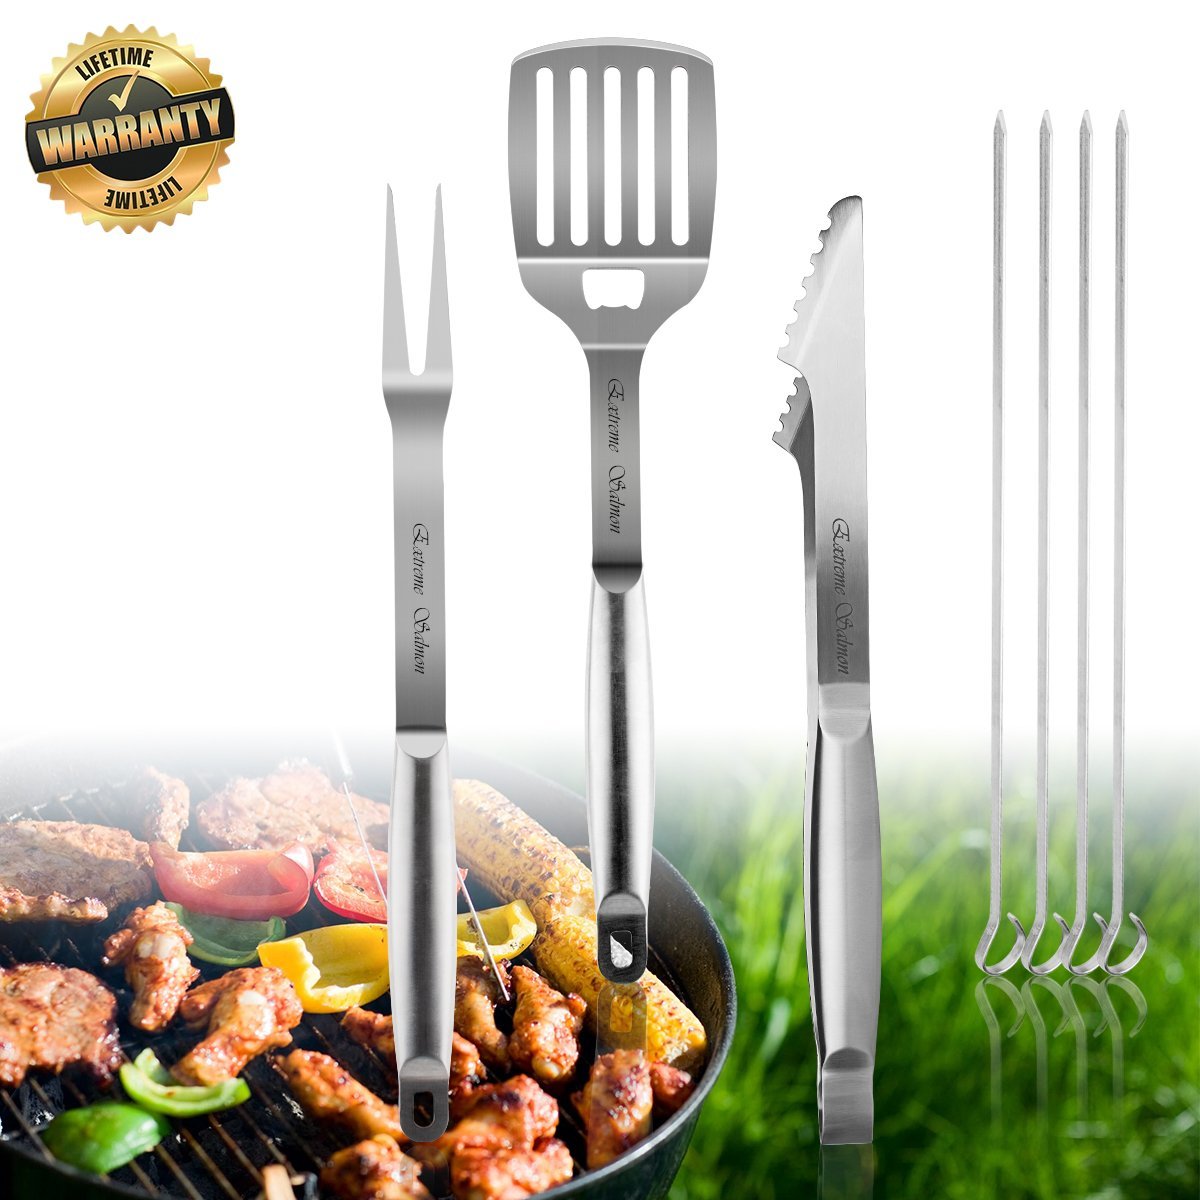 Grill Accessories, BBQ Tool Sets 7 PCS Grill Set Stainless Steel Grilling Utensils Heavy Duty Grill Tool Sets for Barbecue,Spatula,Tongs,Fork and 4 Skewers, Best Outdoor Grill Kit for Dad or Husband - image 1 of 7